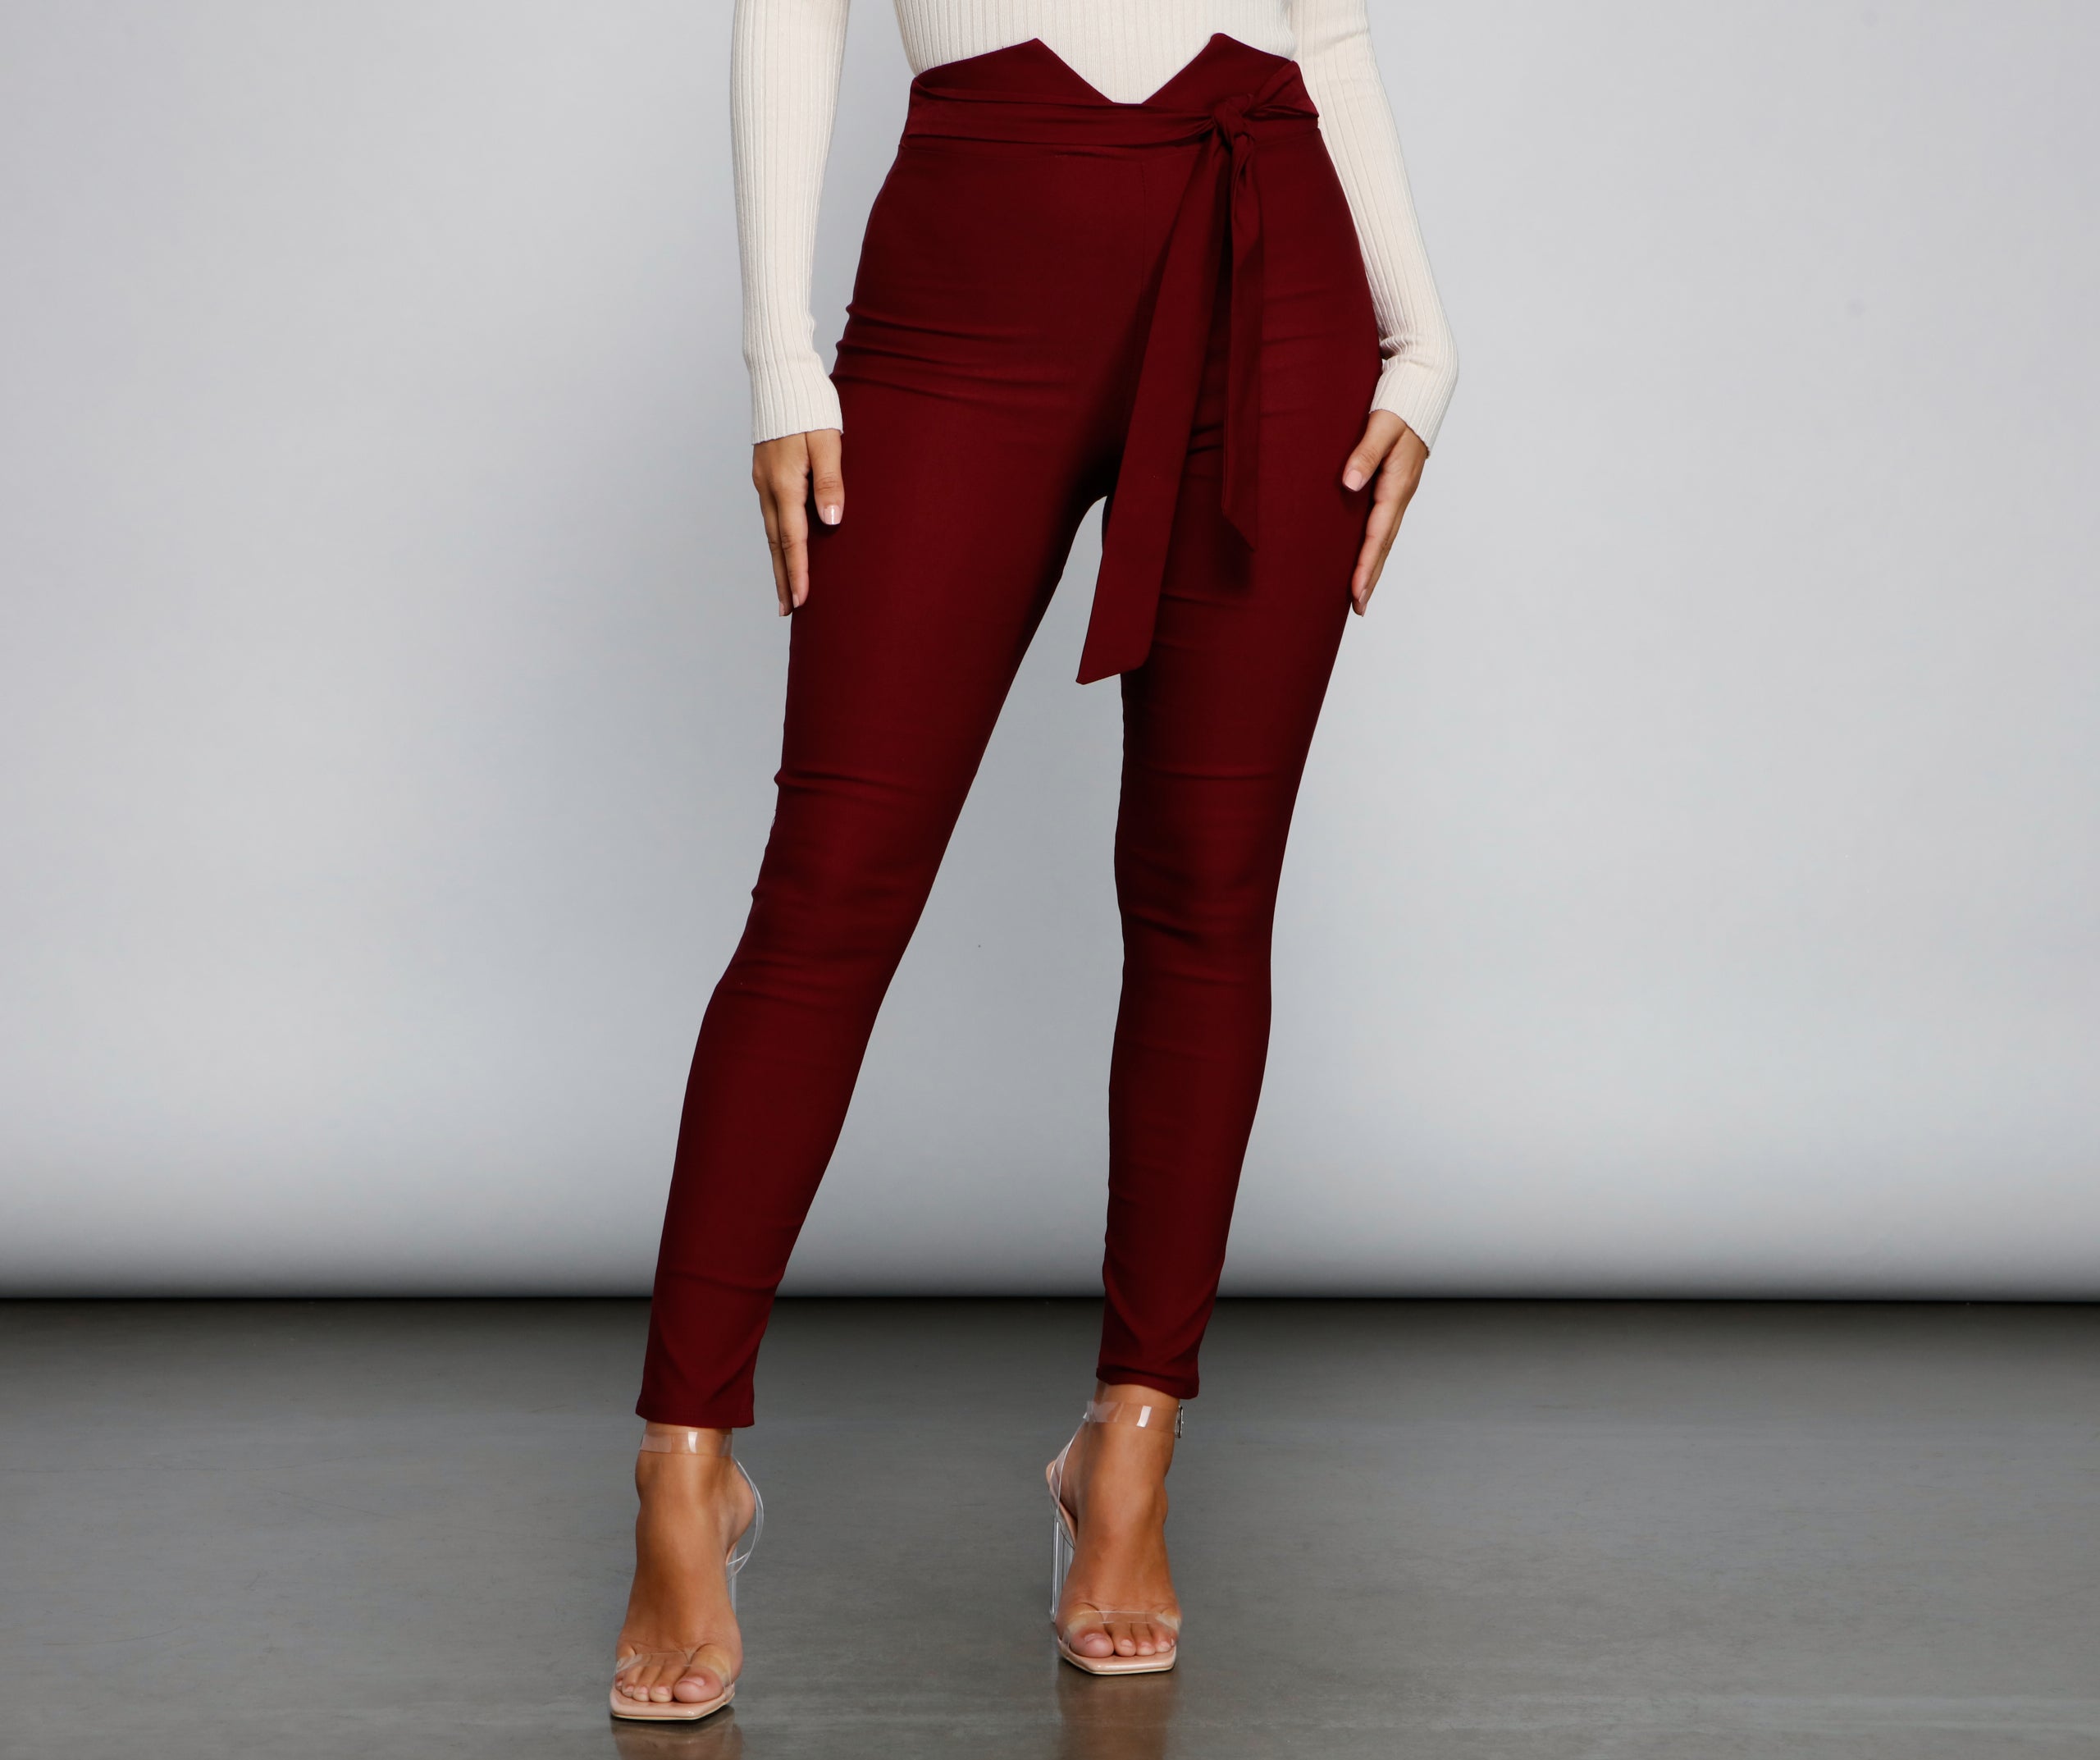 Classic And Chic Tie-Waist Skinny Pants